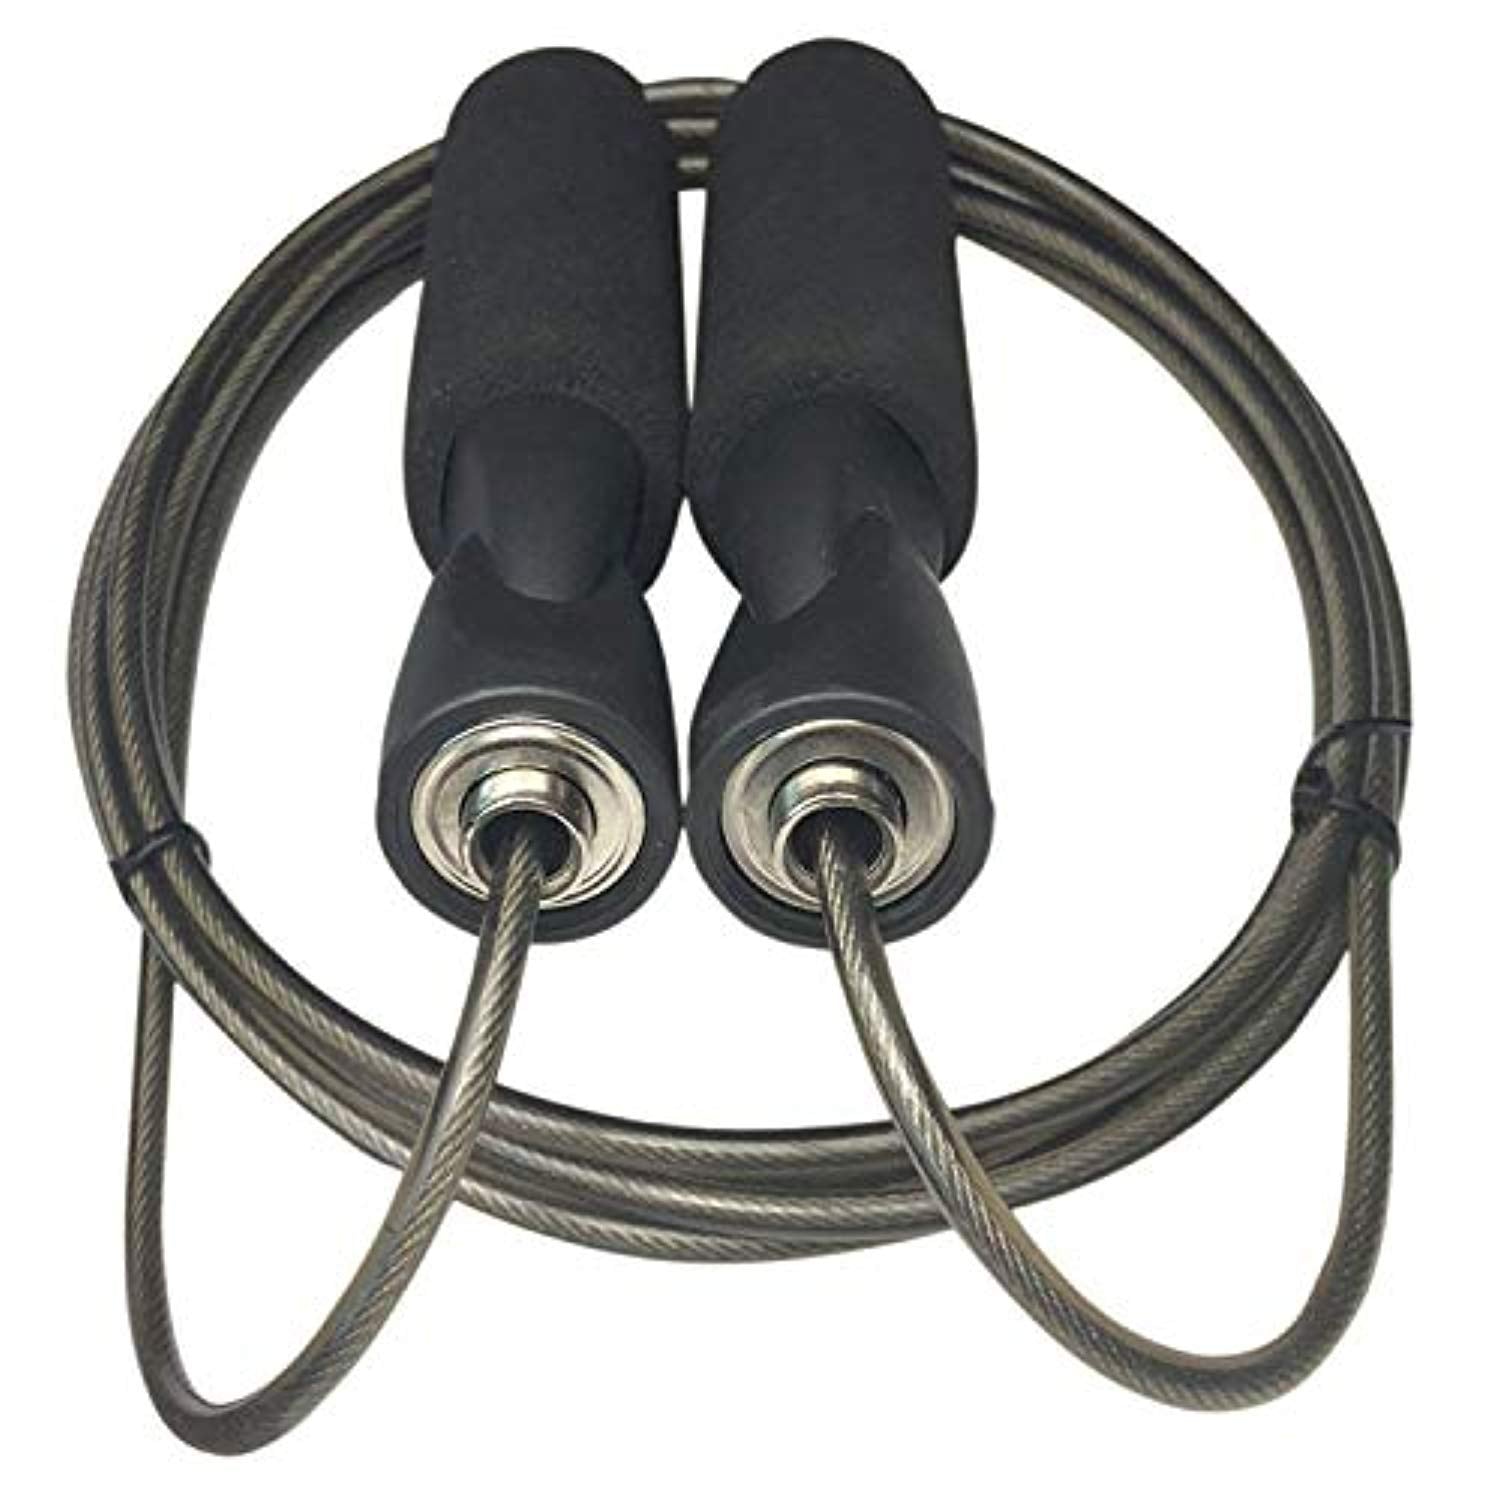 Aerobic Exercise Skipping Rope